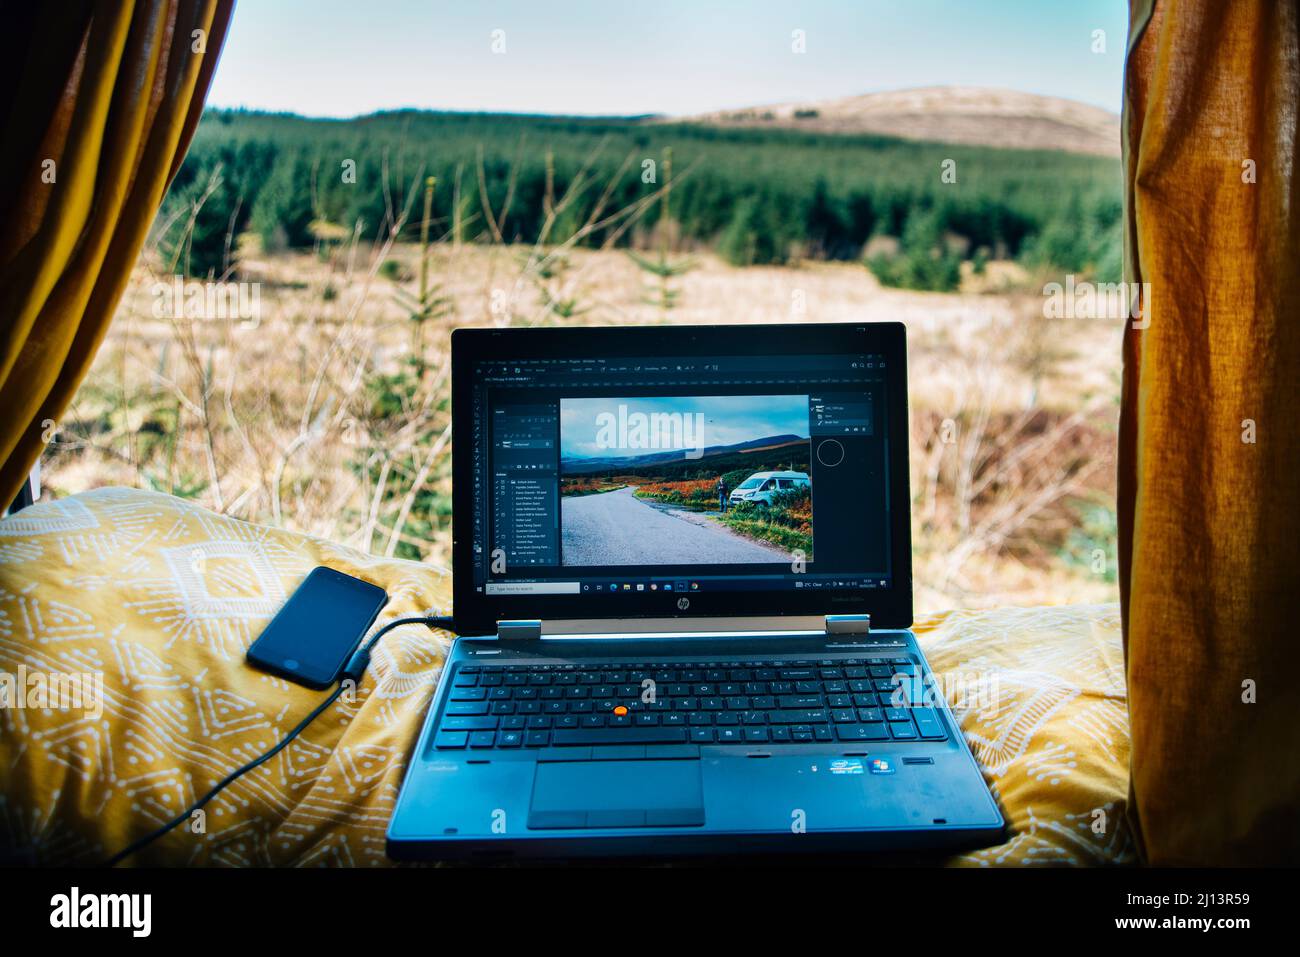 Working from a campervan on the road The life of a digital nomad. Laptop and phone on show with a view of the scottish countryside. Travel photography Stock Photo